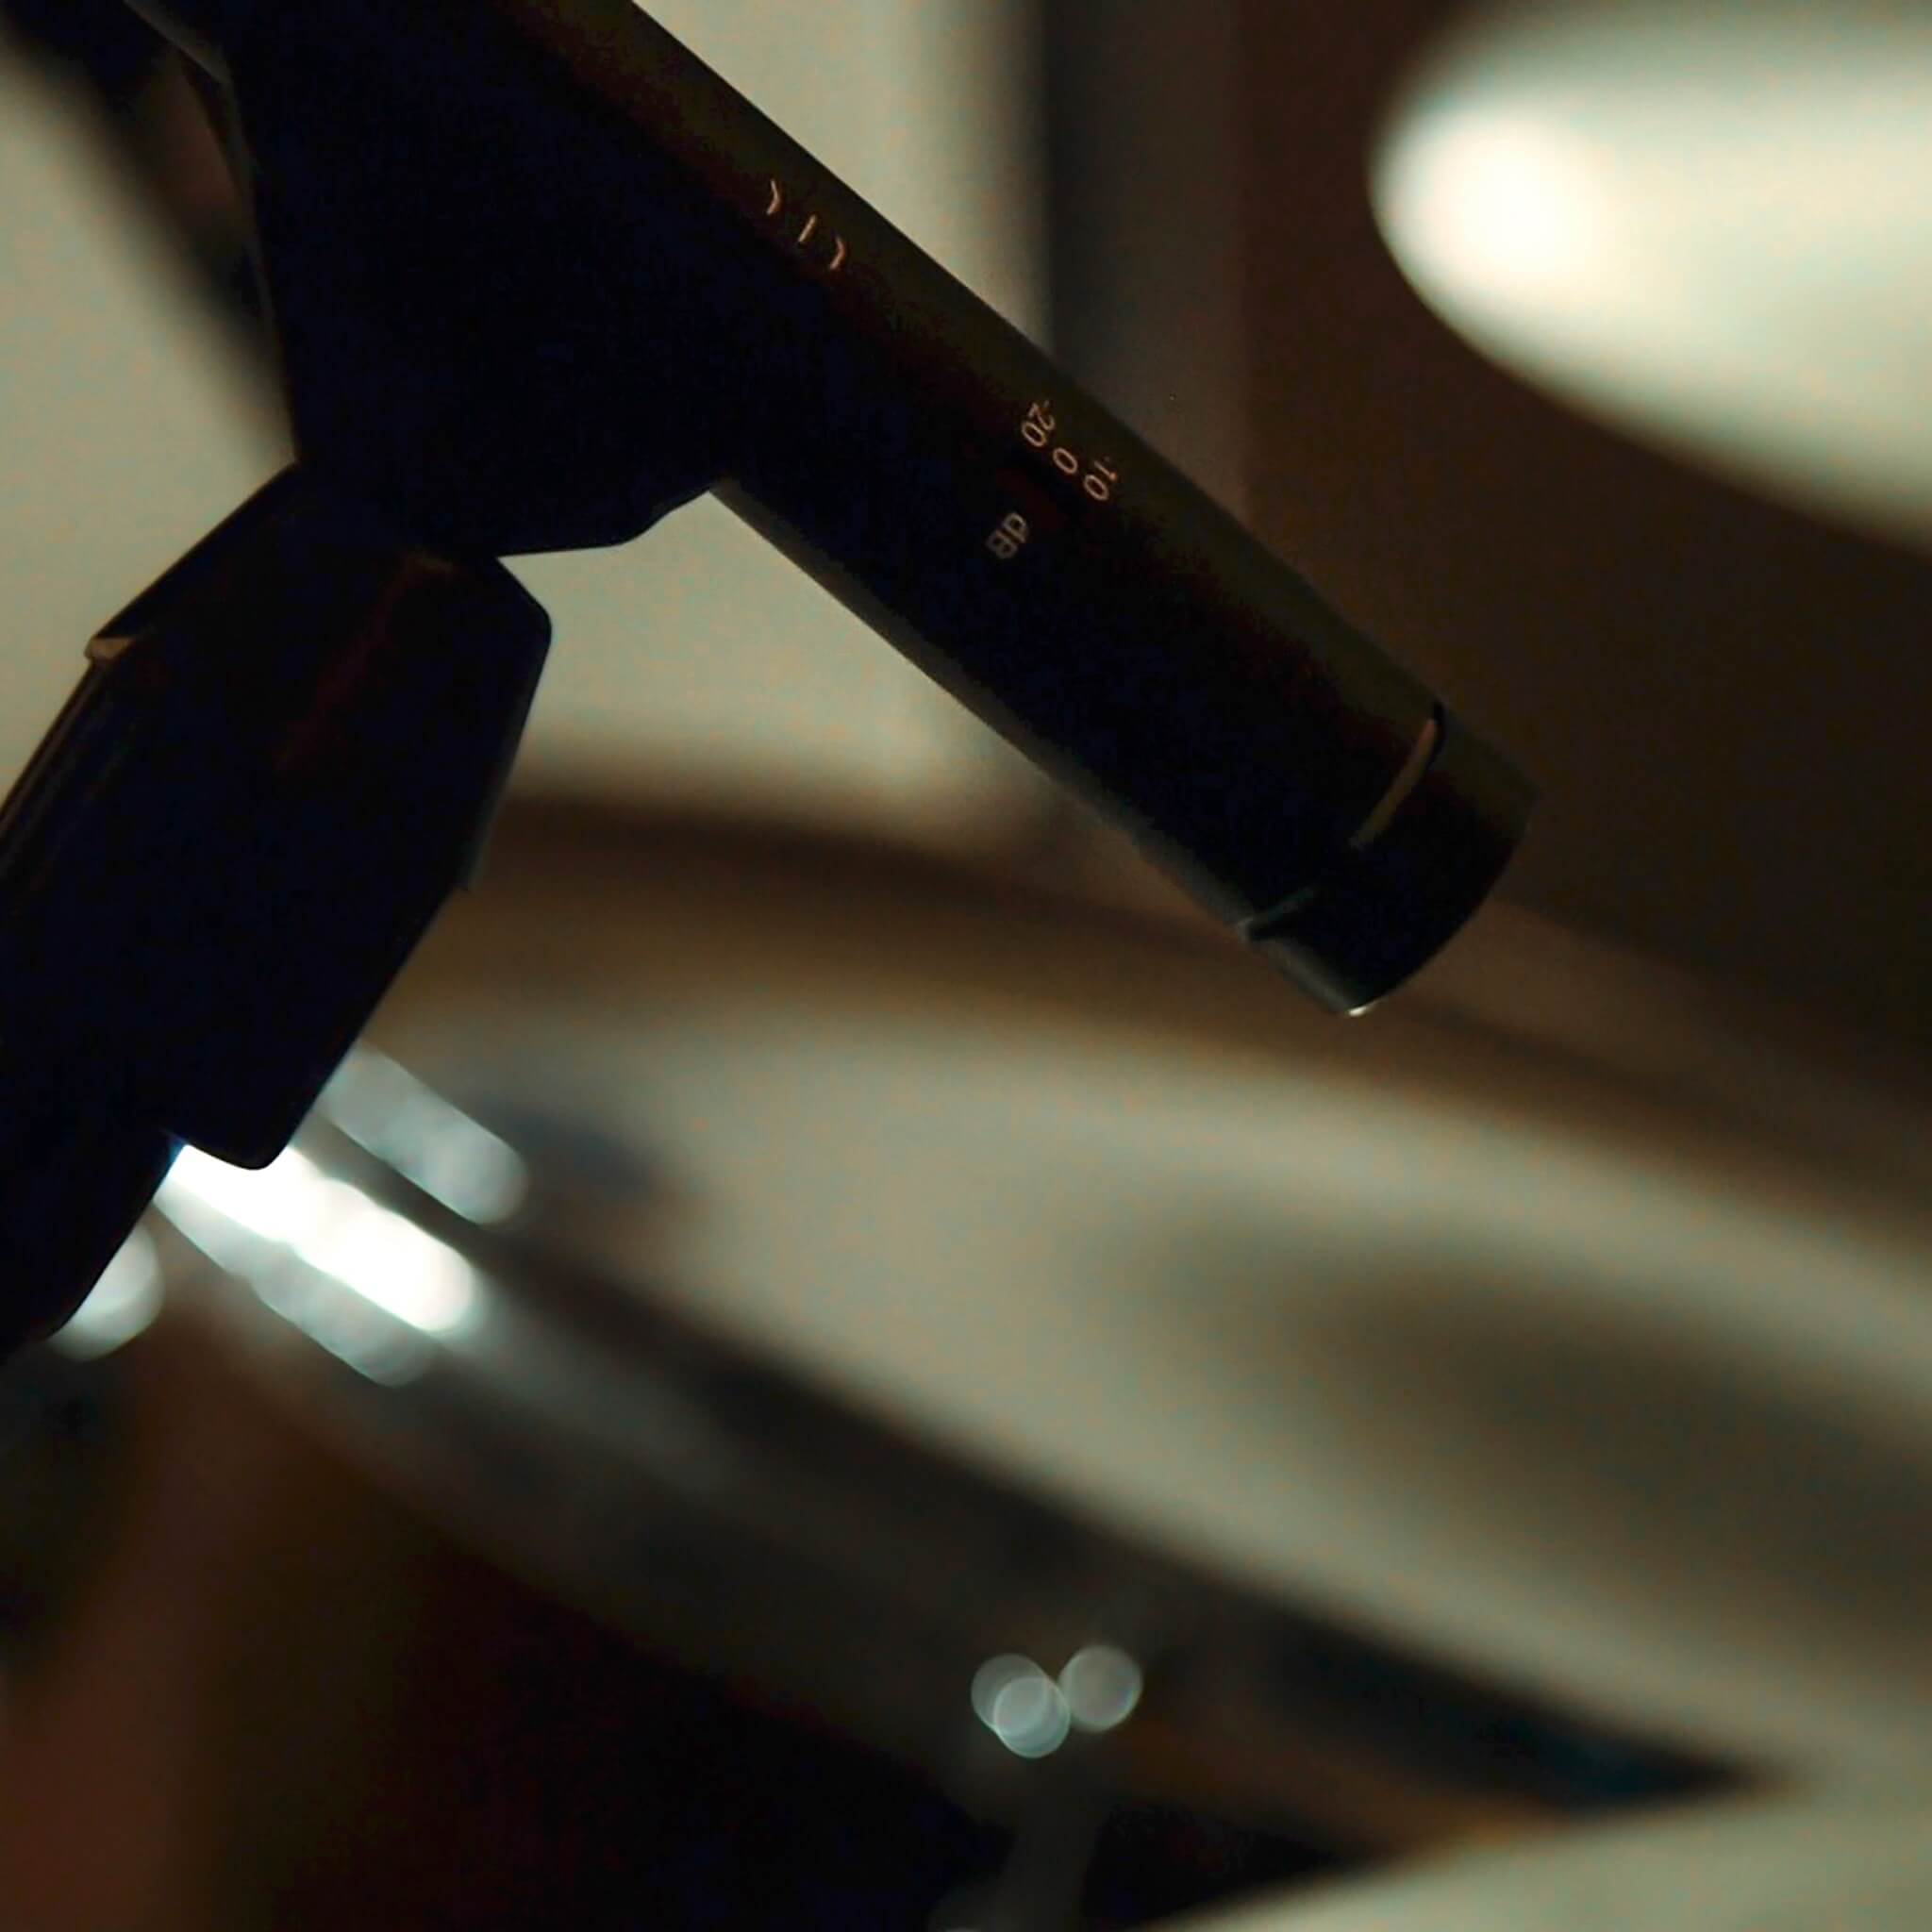 sE Electronics sE8 - Small Diaphragm Cardioid Condenser Microphone, in use with drums